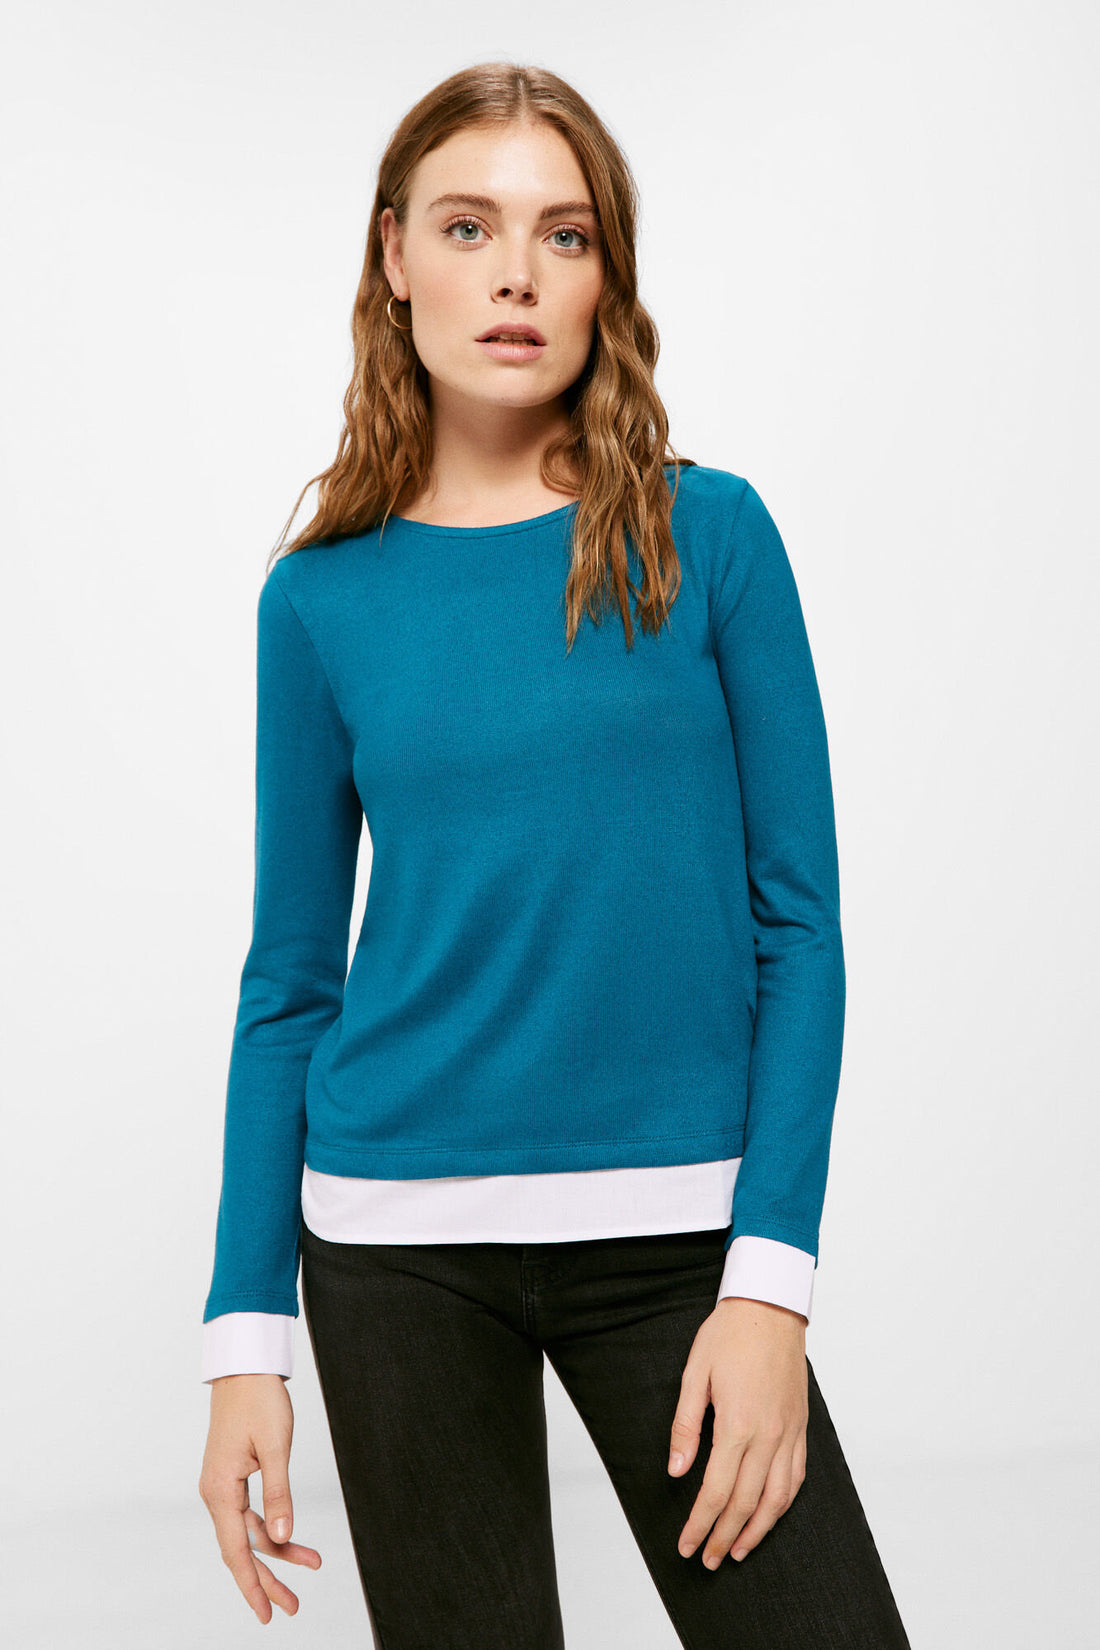 Long Sleeve T Shirt With Extended Hem_6765947_85_01